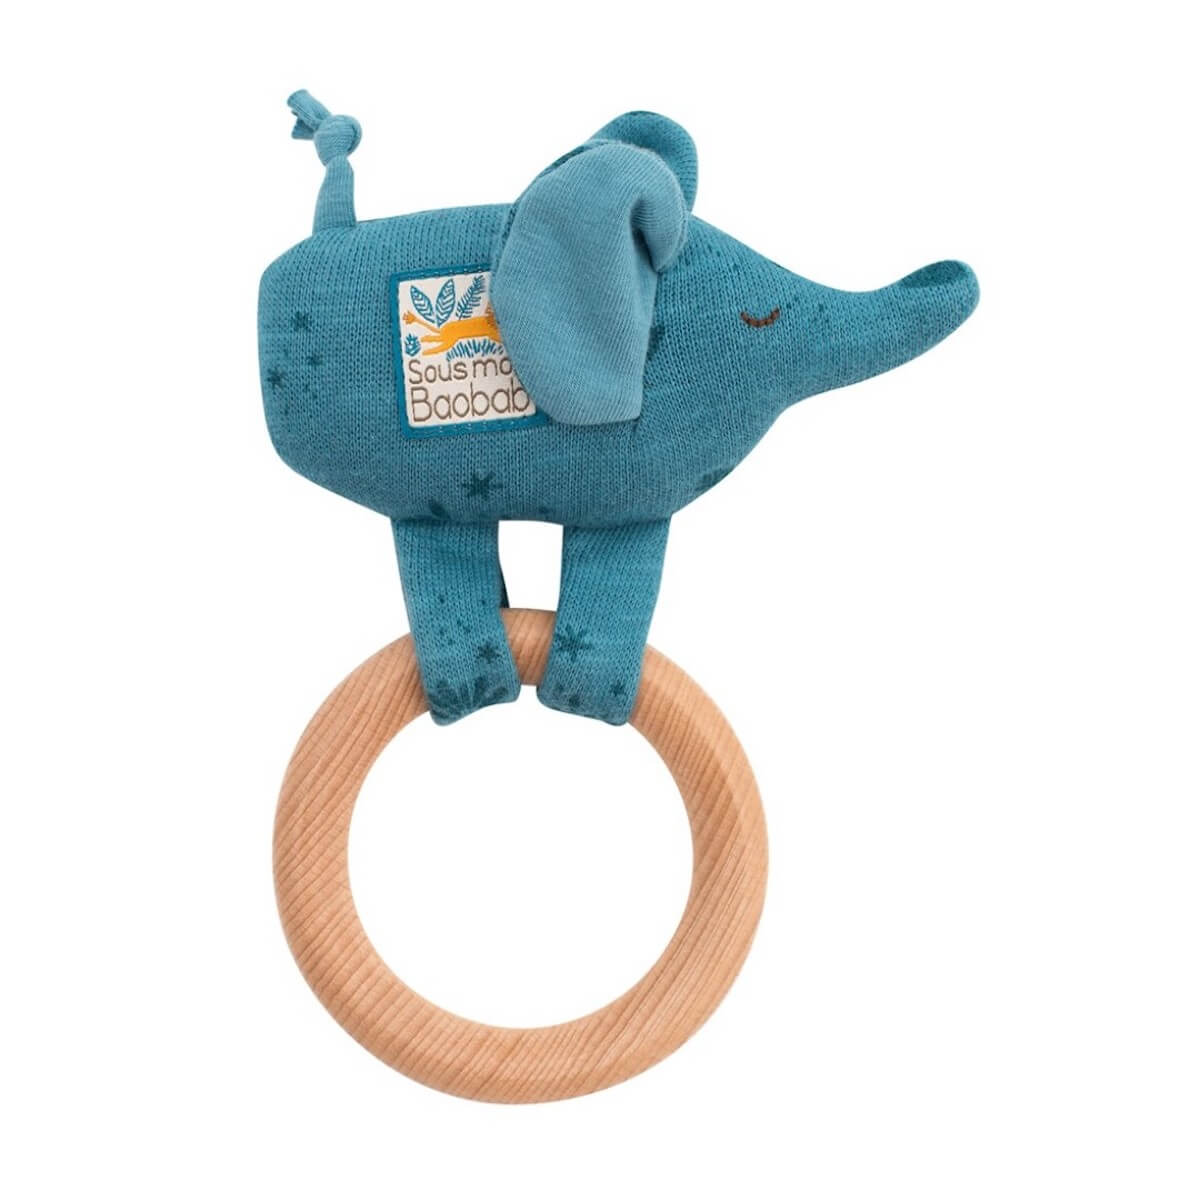 Moulin Roty Wooden Baobab Elephant Ring Rattle